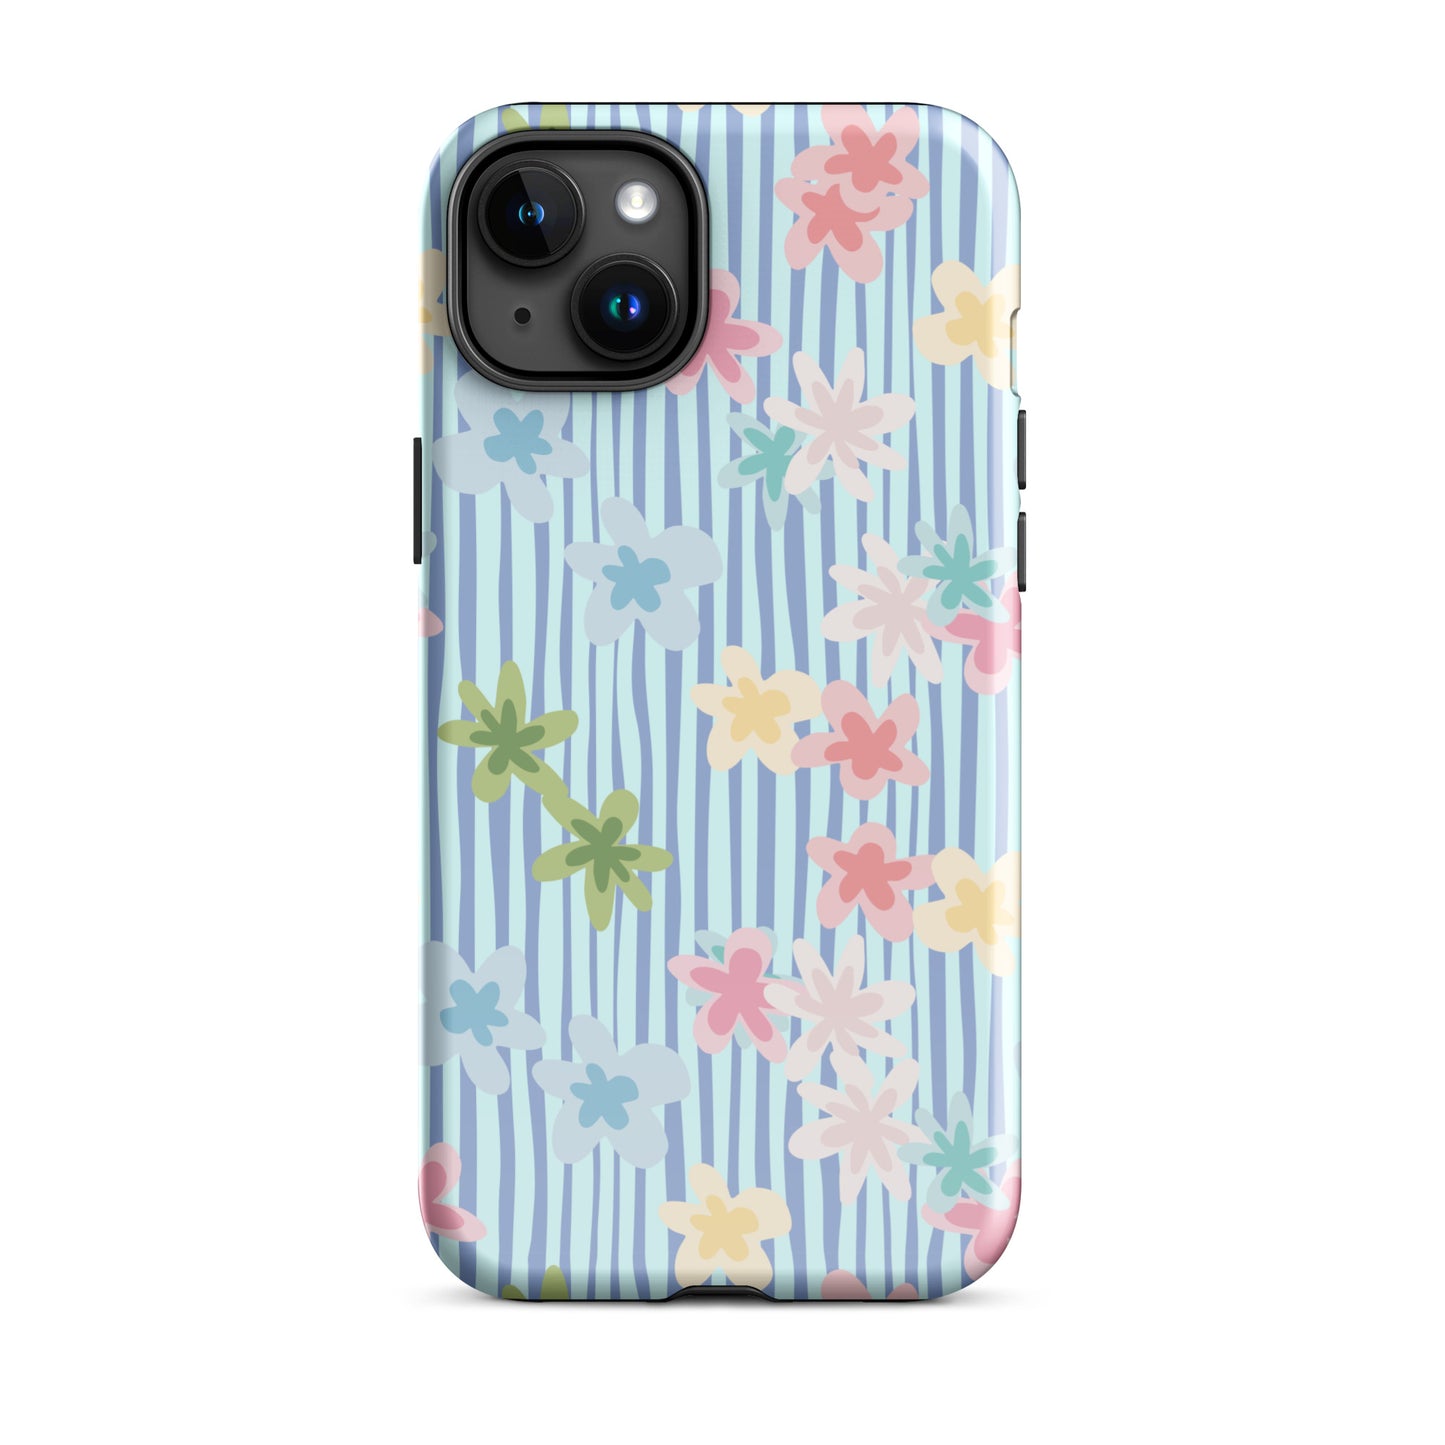 Tropical Floral iPhone Case